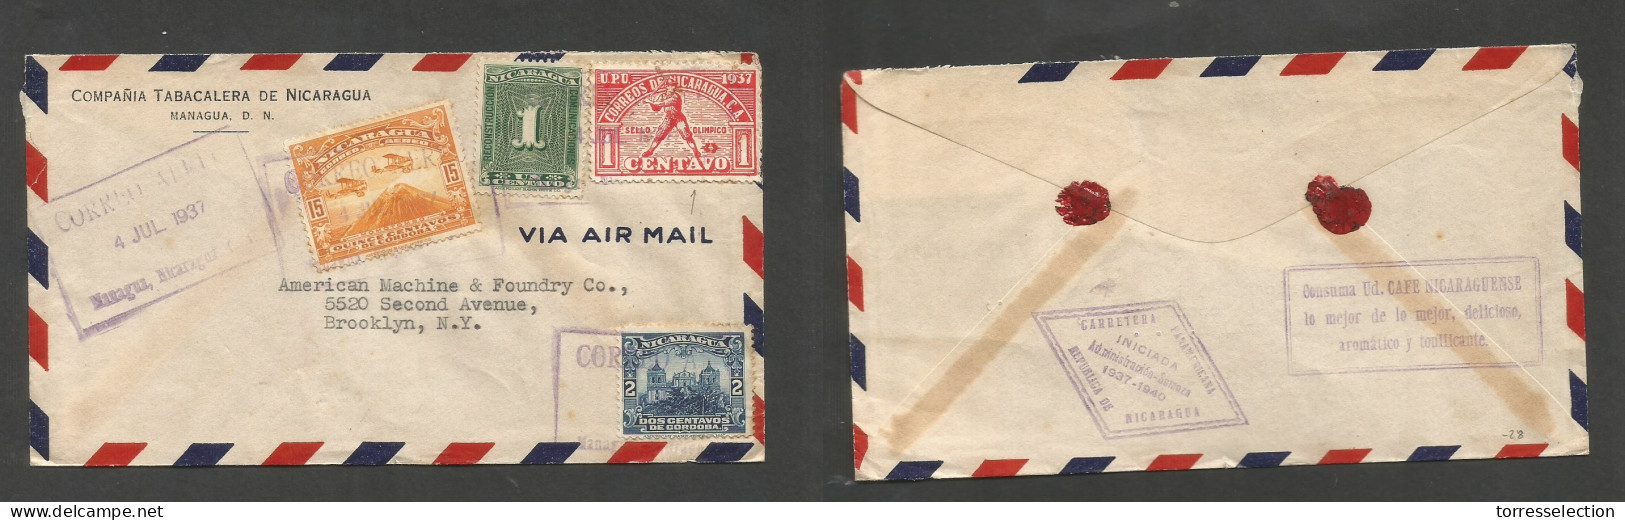 NICARAGUA. 1937 (4 July) Managua - USA, Brooklyn. Air Multifkd Env, Mixed Issues At 19c Rate Reverse Two Advert Cachets. - Nicaragua